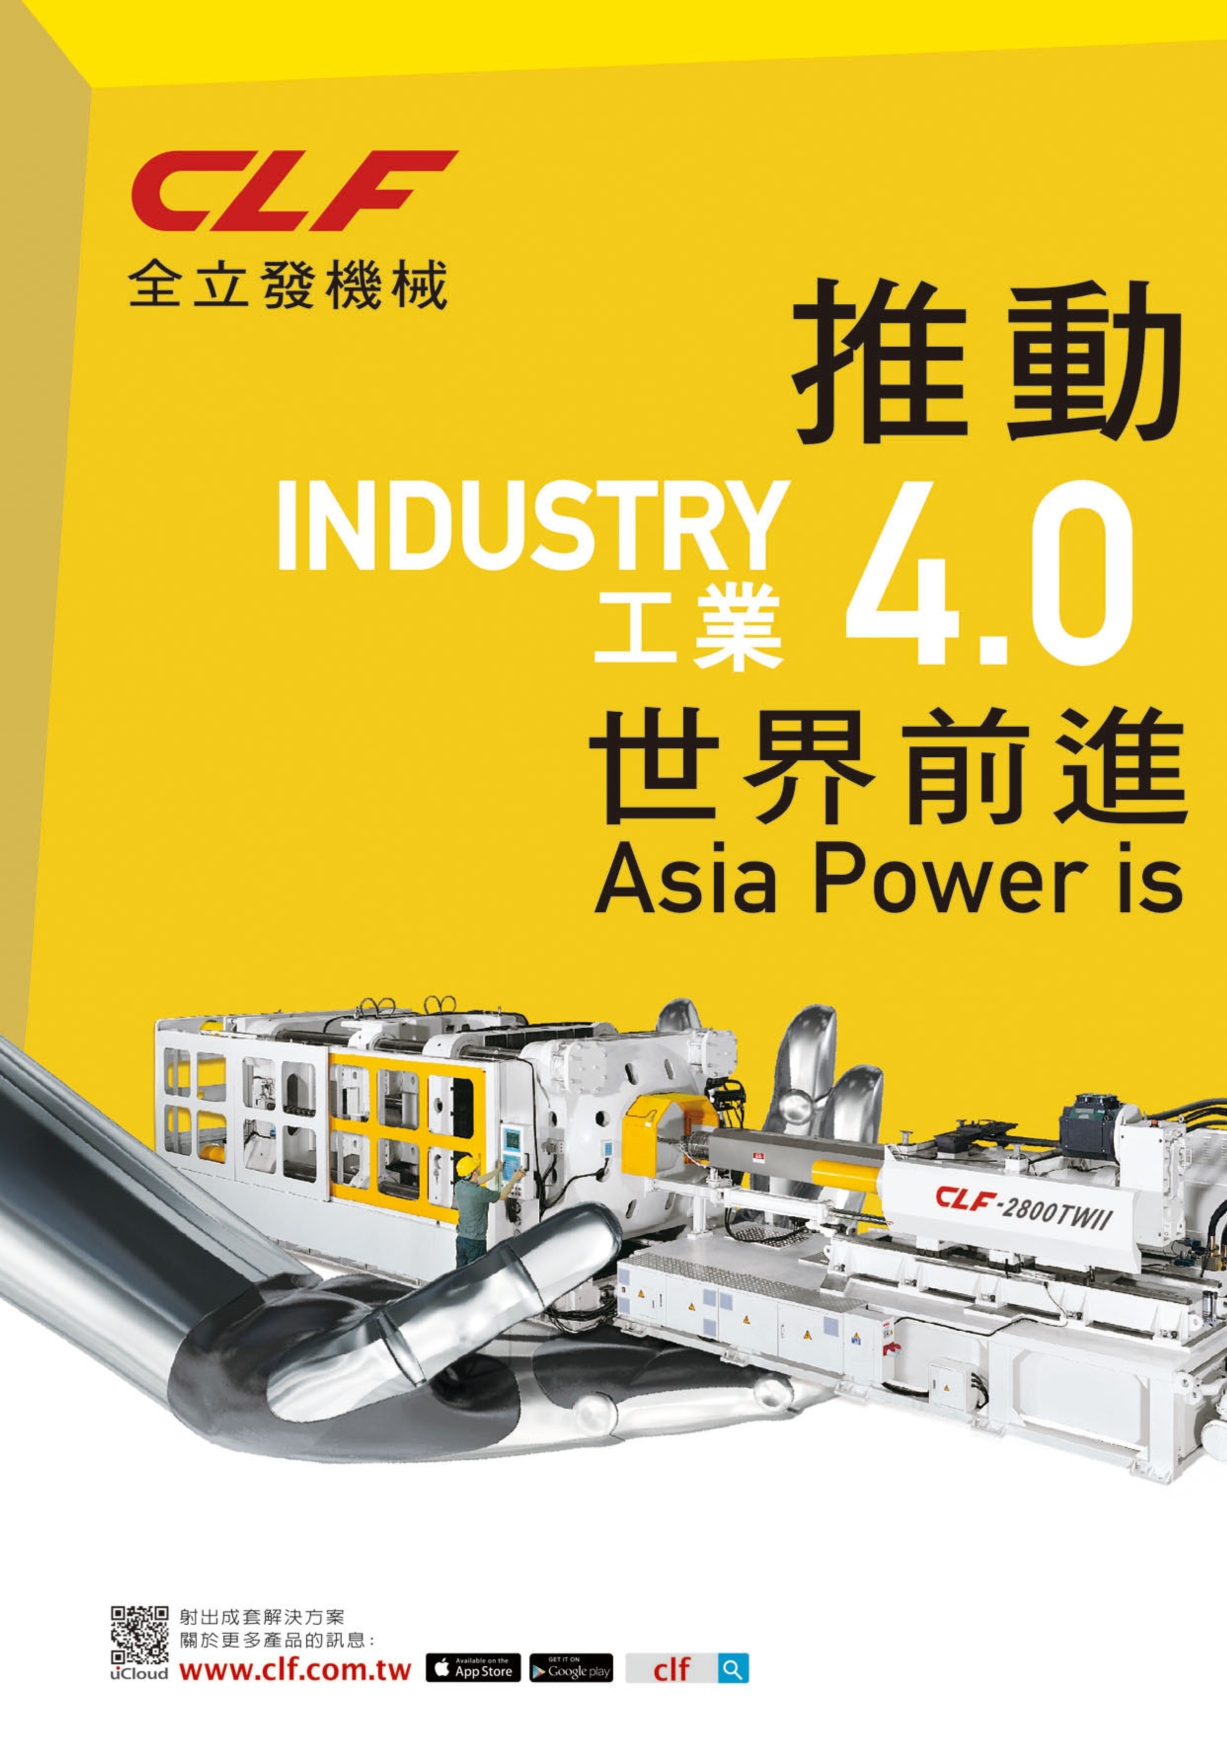 Who Makes Machinery in Taiwan (Chinese) CHUAN LIH FA MACHINERY WORKS CO., LTD.